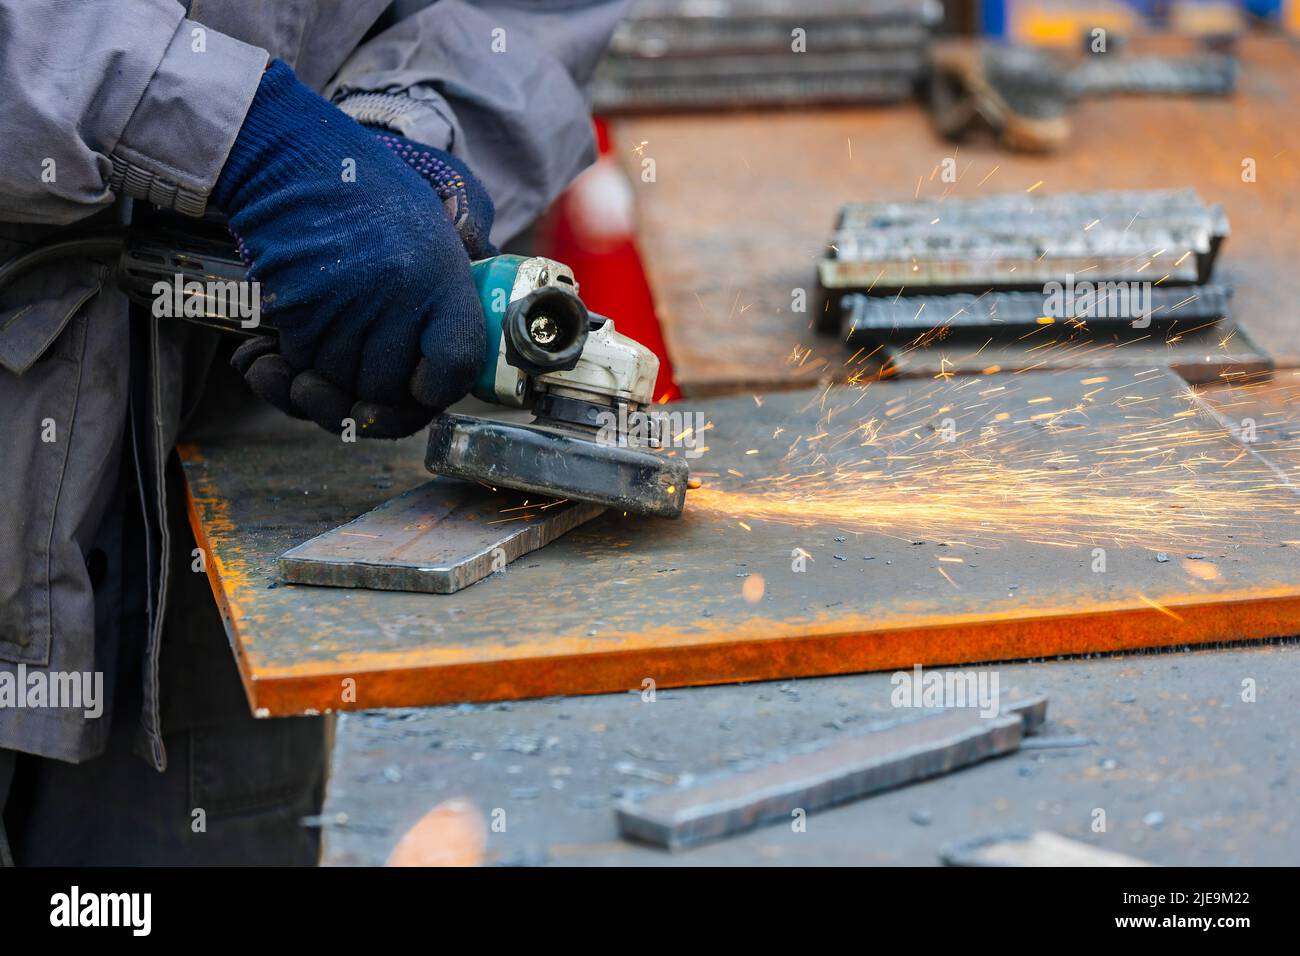 Worker on workbench grinds sheets of metal with grinder and sparks fly. Hands with close-up instrument. Authentic scene workflow. Processing of iron blanks for construction. Stock Photo